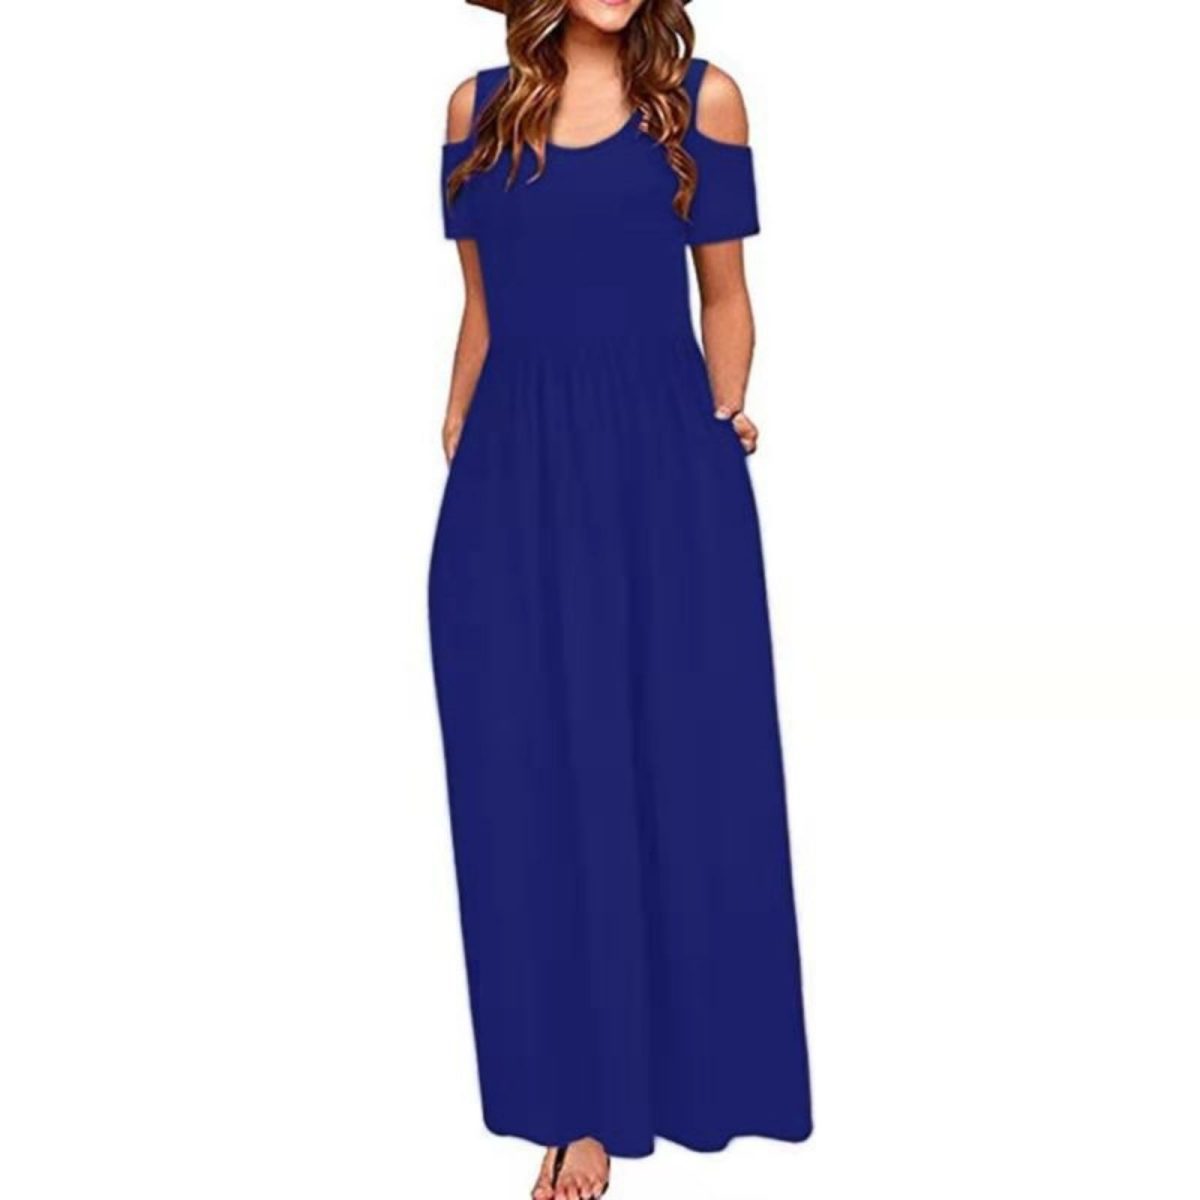 Round Neck Casual Short Sleeve Dress in Dresses